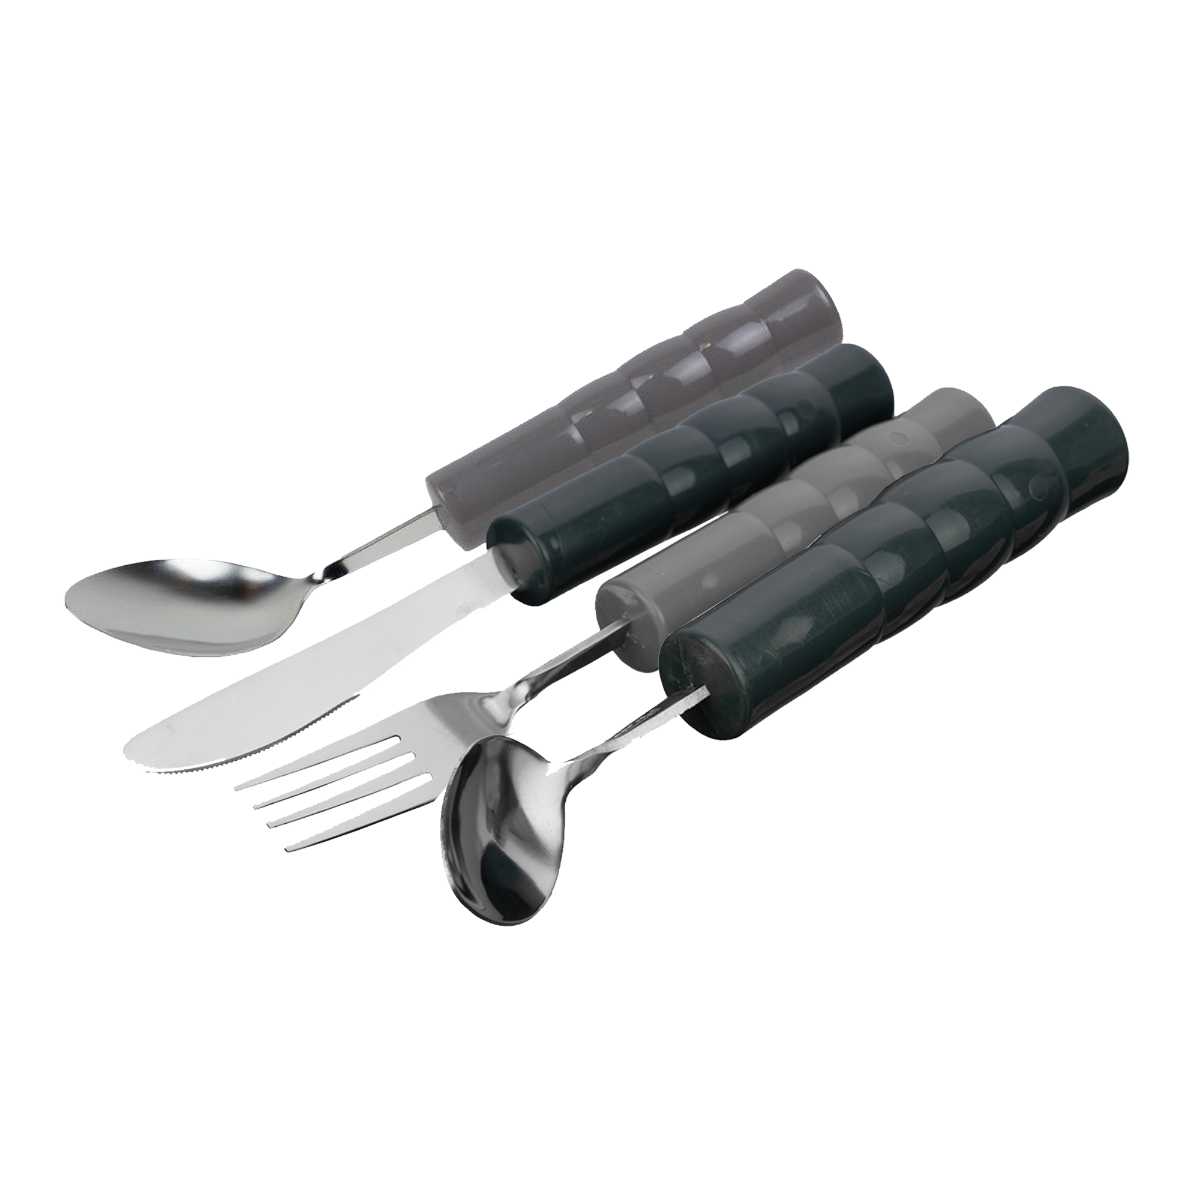 https://www.performancehealth.com/media/catalog/product/s/a/sammons_preston_weighted_utensils-family.png?optimize=low&bg-color=255,255,255&fit=bounds&height=&width=